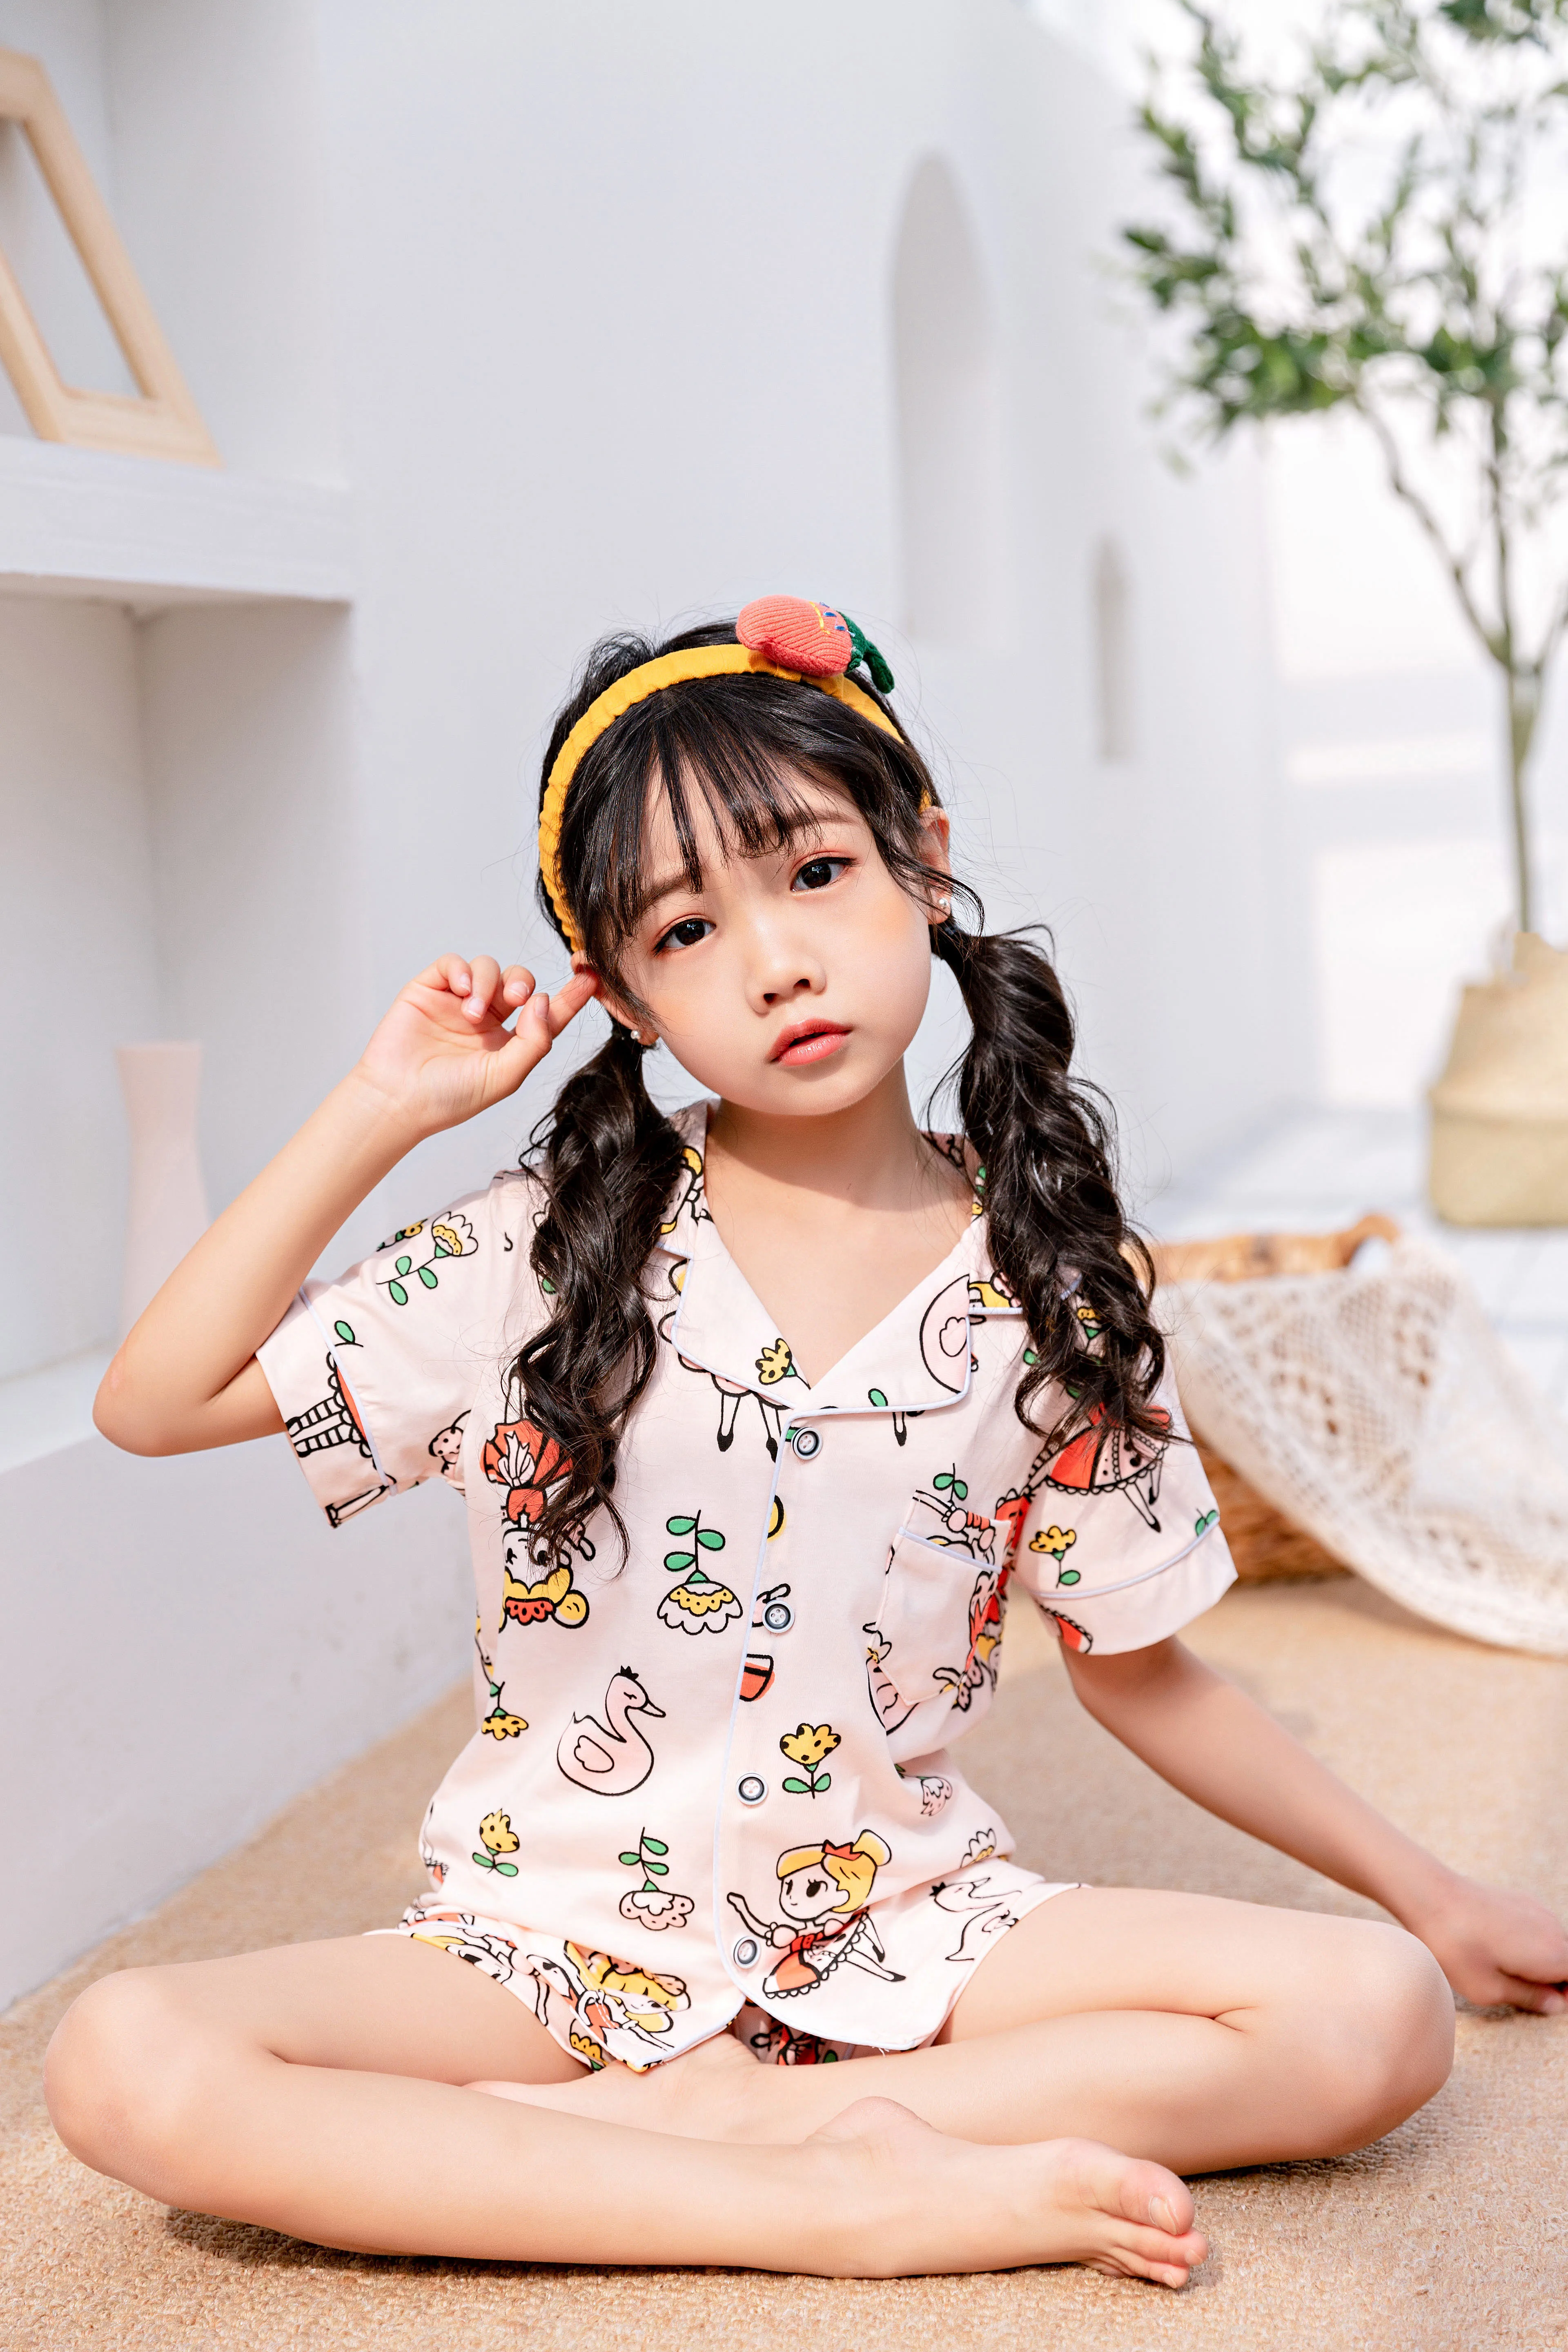 Pink And Green Striped Pajamas Lovely Sleepwear For Kids Cute Style ...